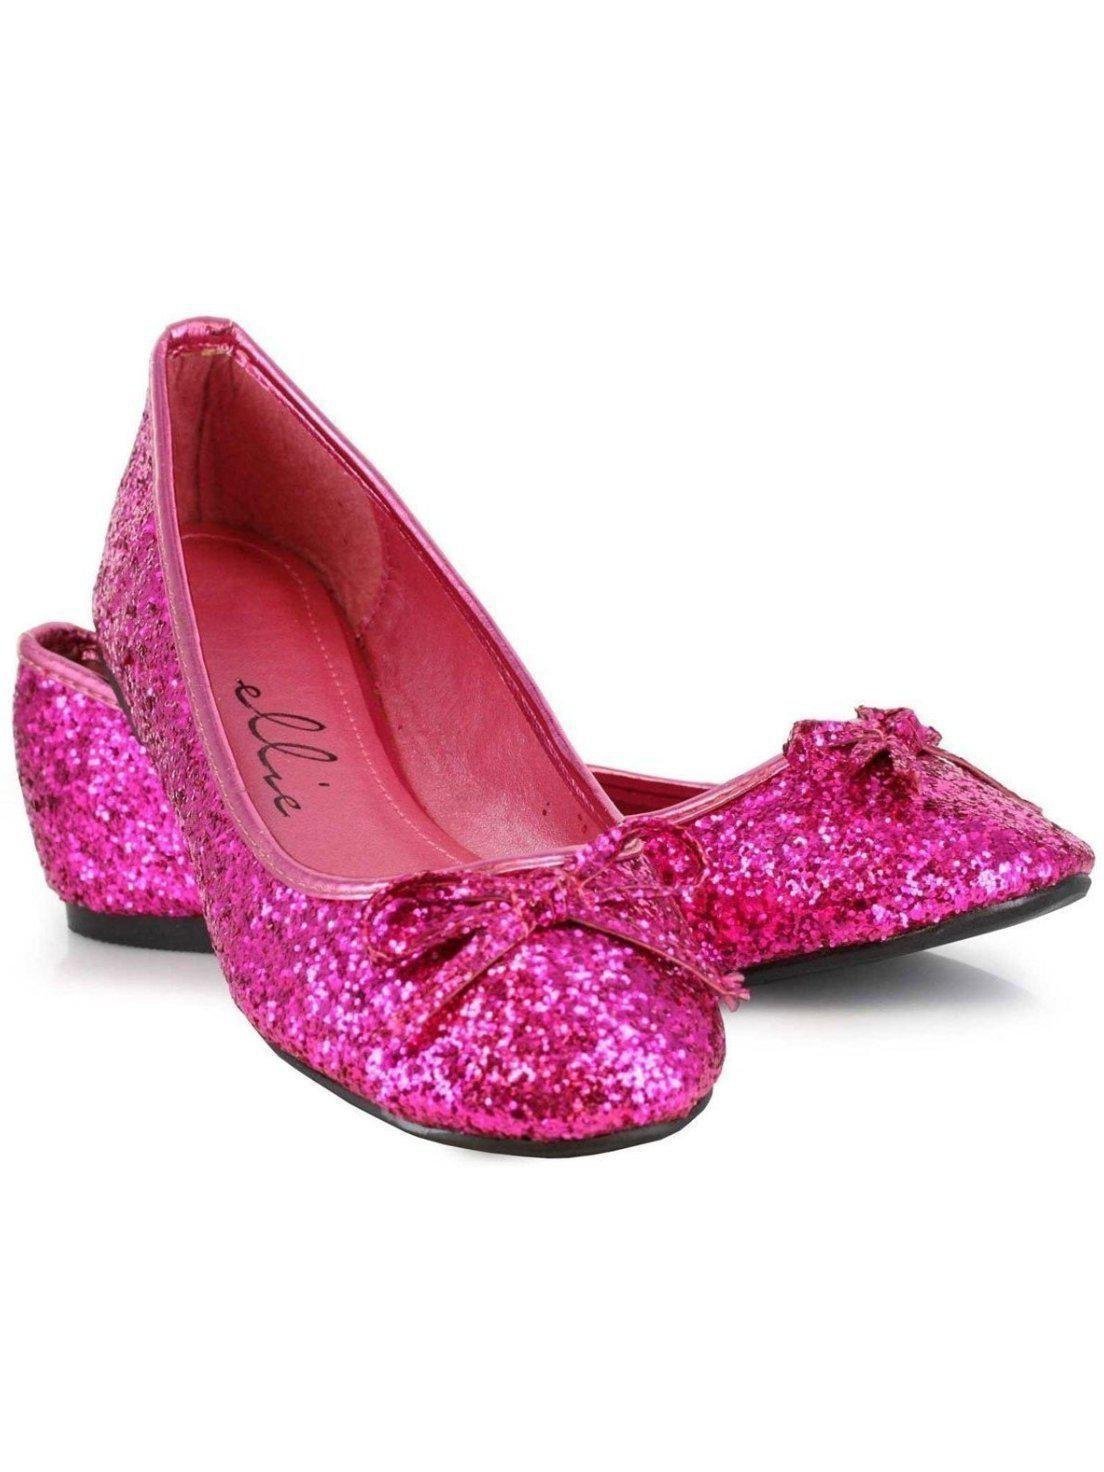 016- Mila-G, Women;s Glitter Flats with Bow, Size: 6, Red